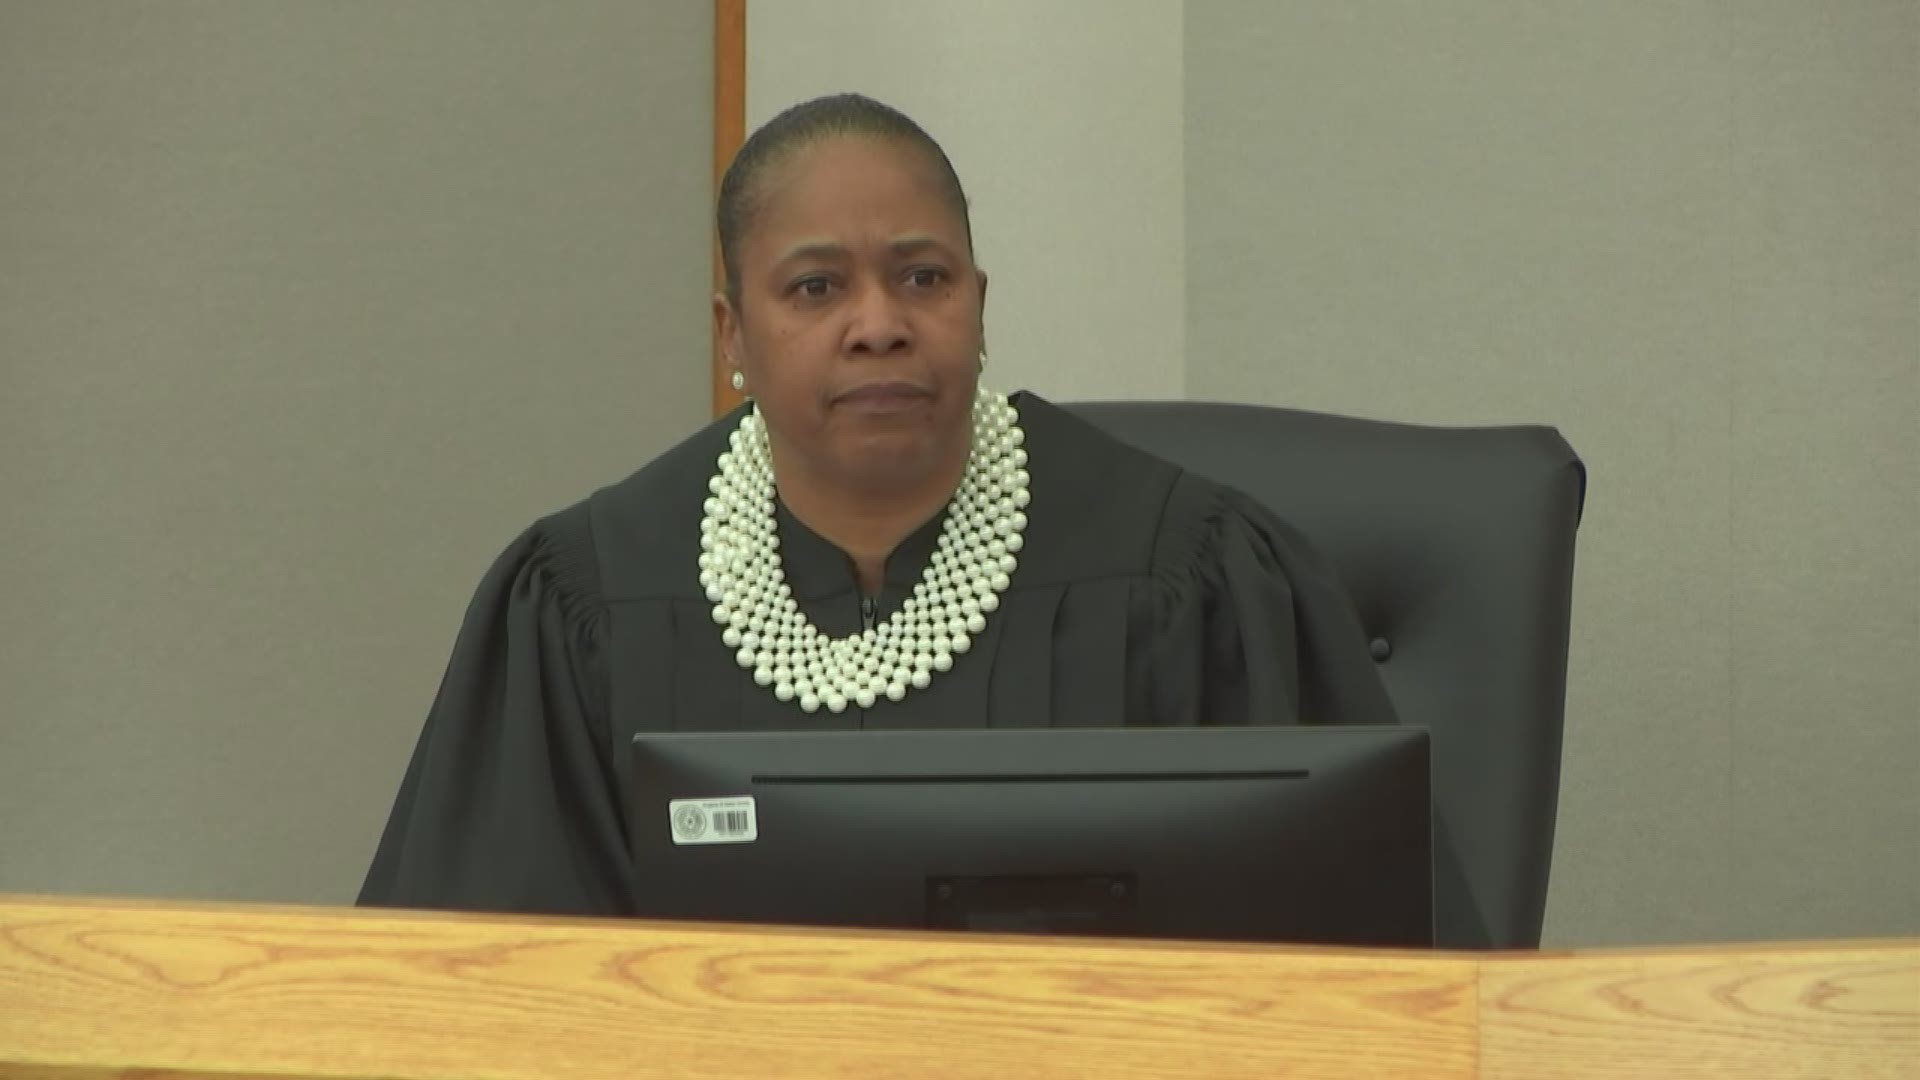 State District Judge Tammy Kemp admonished the individual whose laptop played music in the middle of the courtroom.